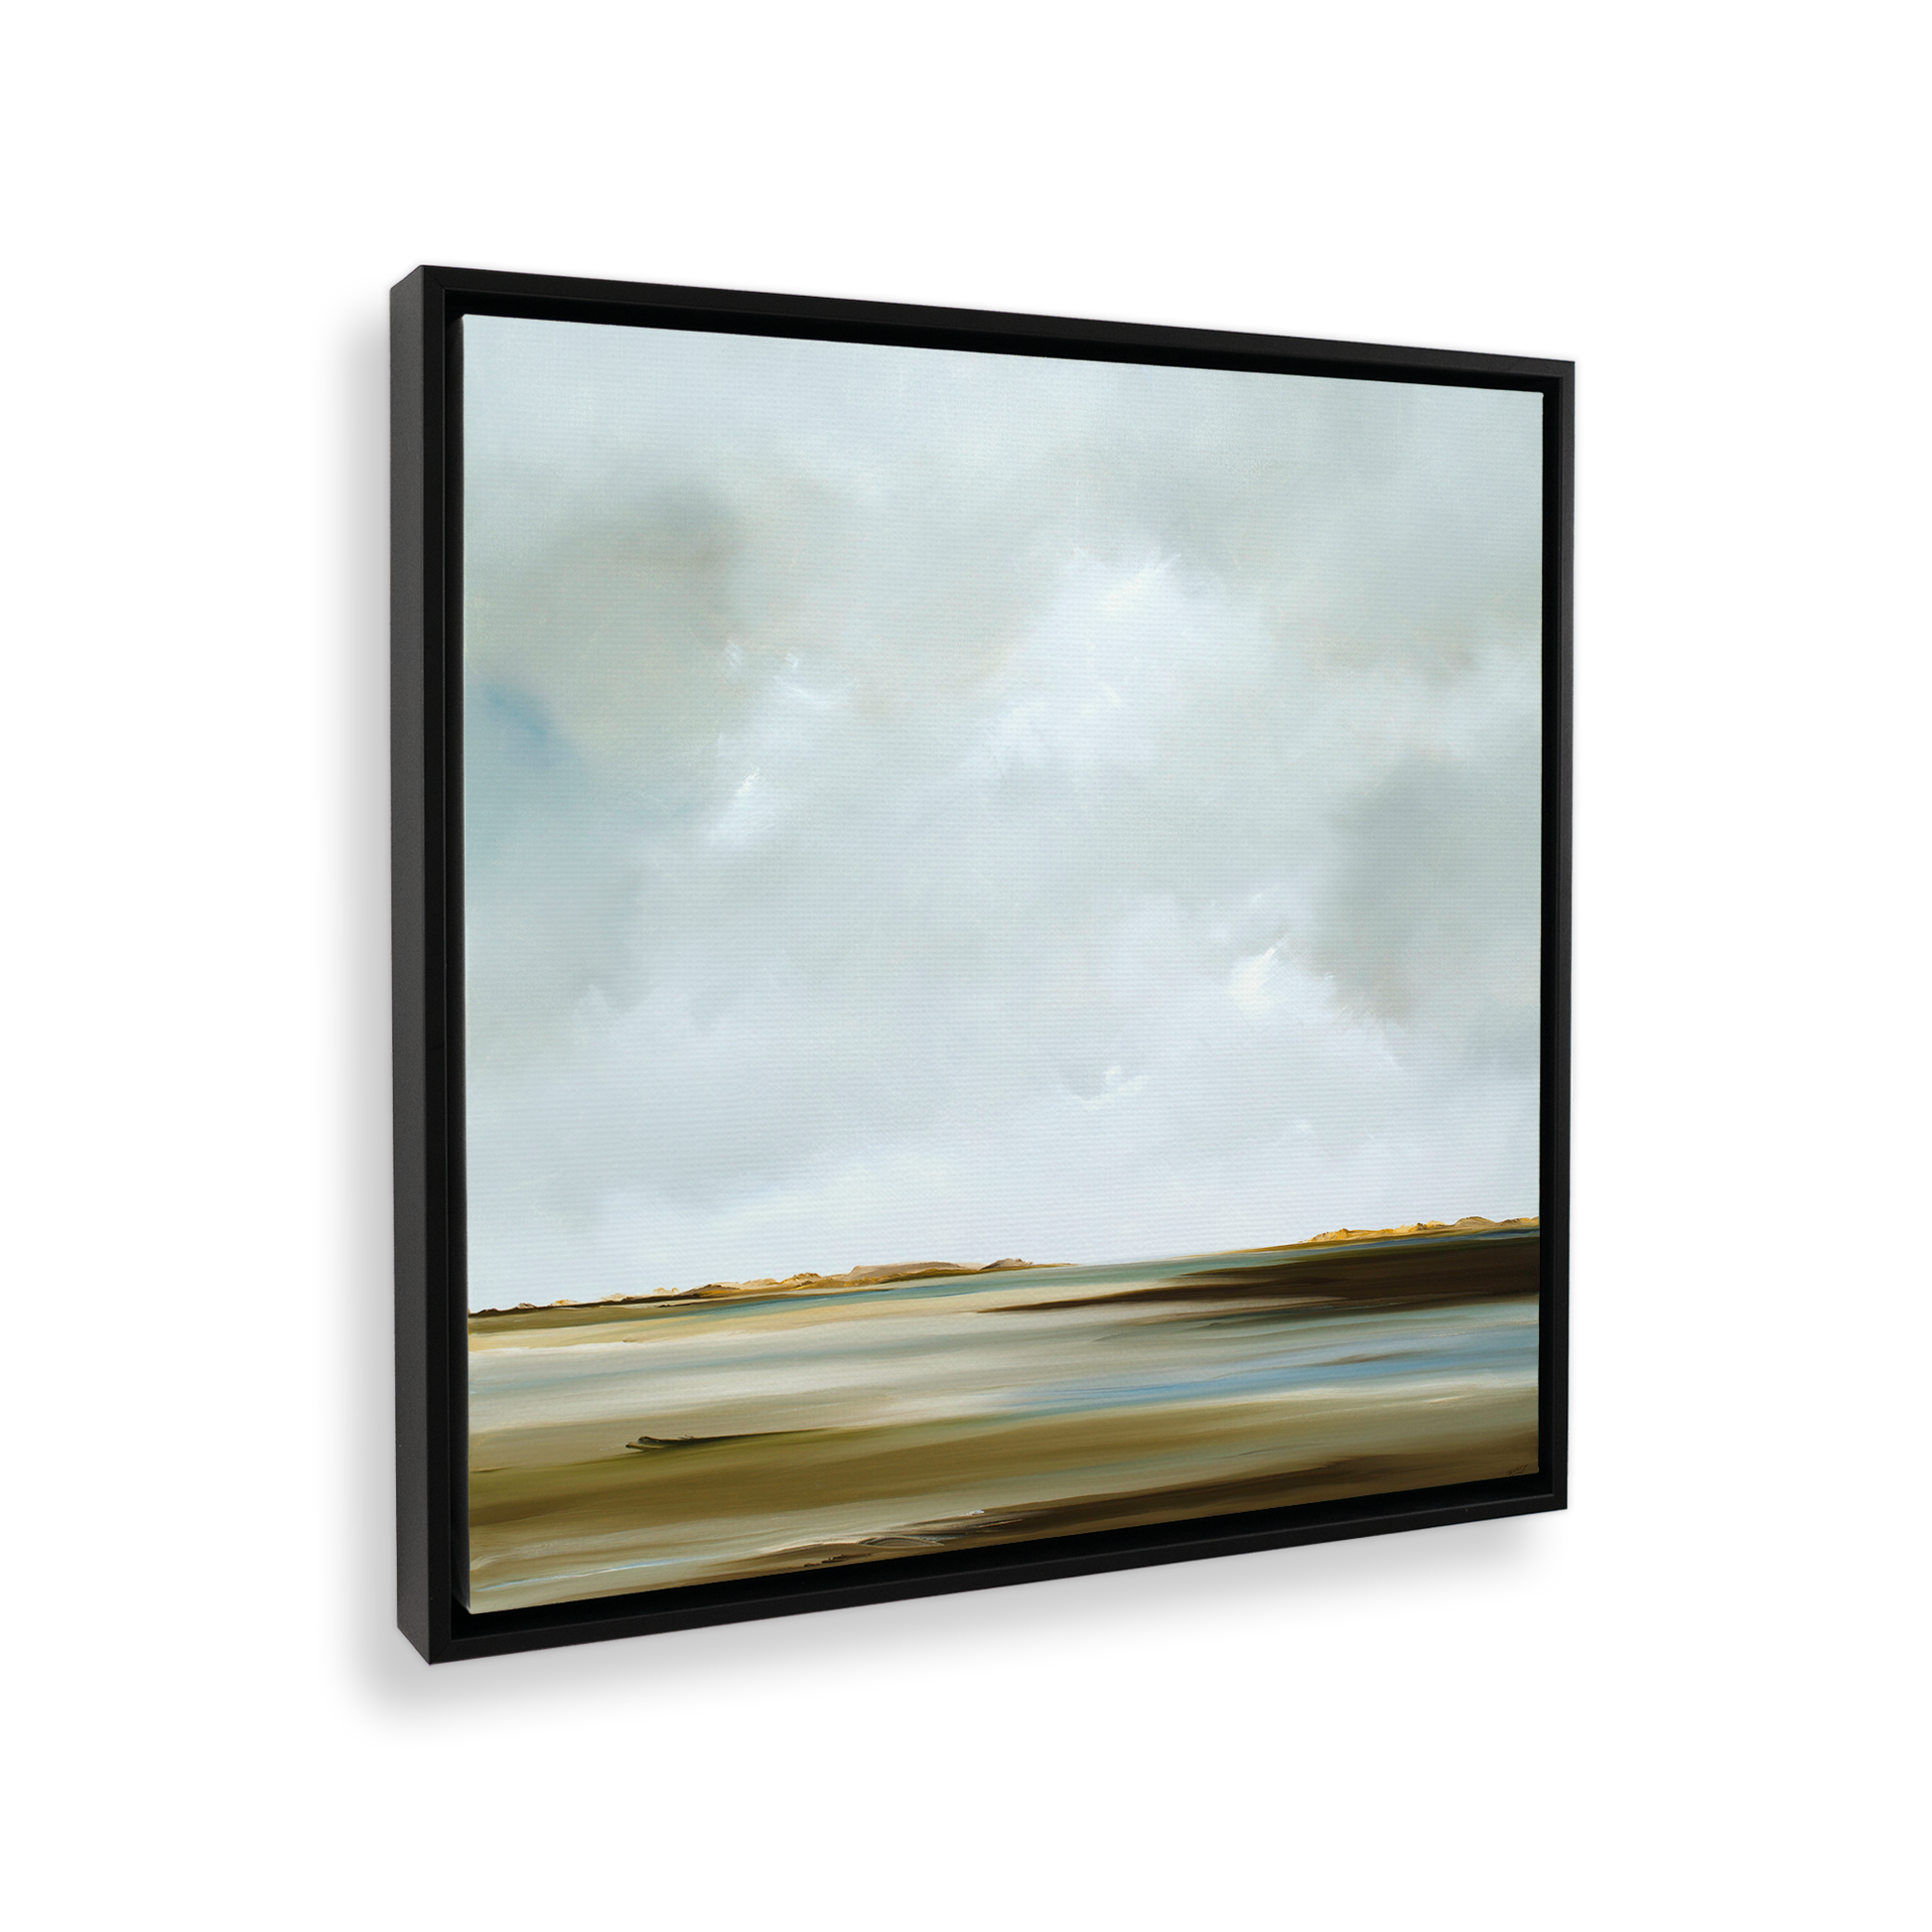 [color:Satin Black],[shape:square], Picture of art in a black frame at angle